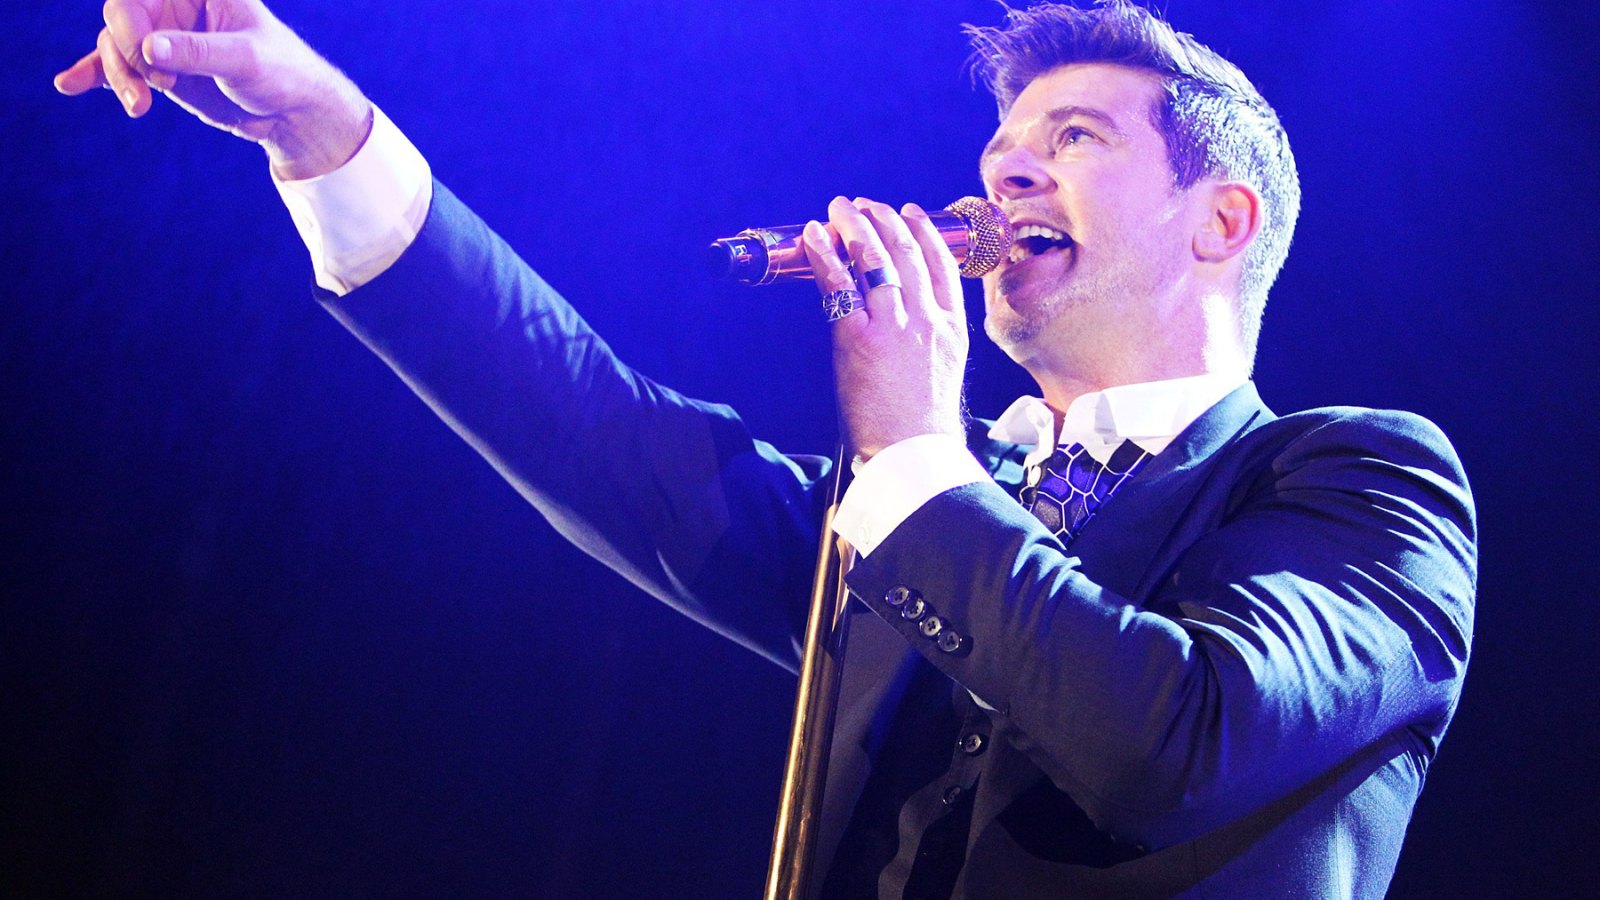 Robin Thicke performs in Fairfax, VA on February 27, 2014